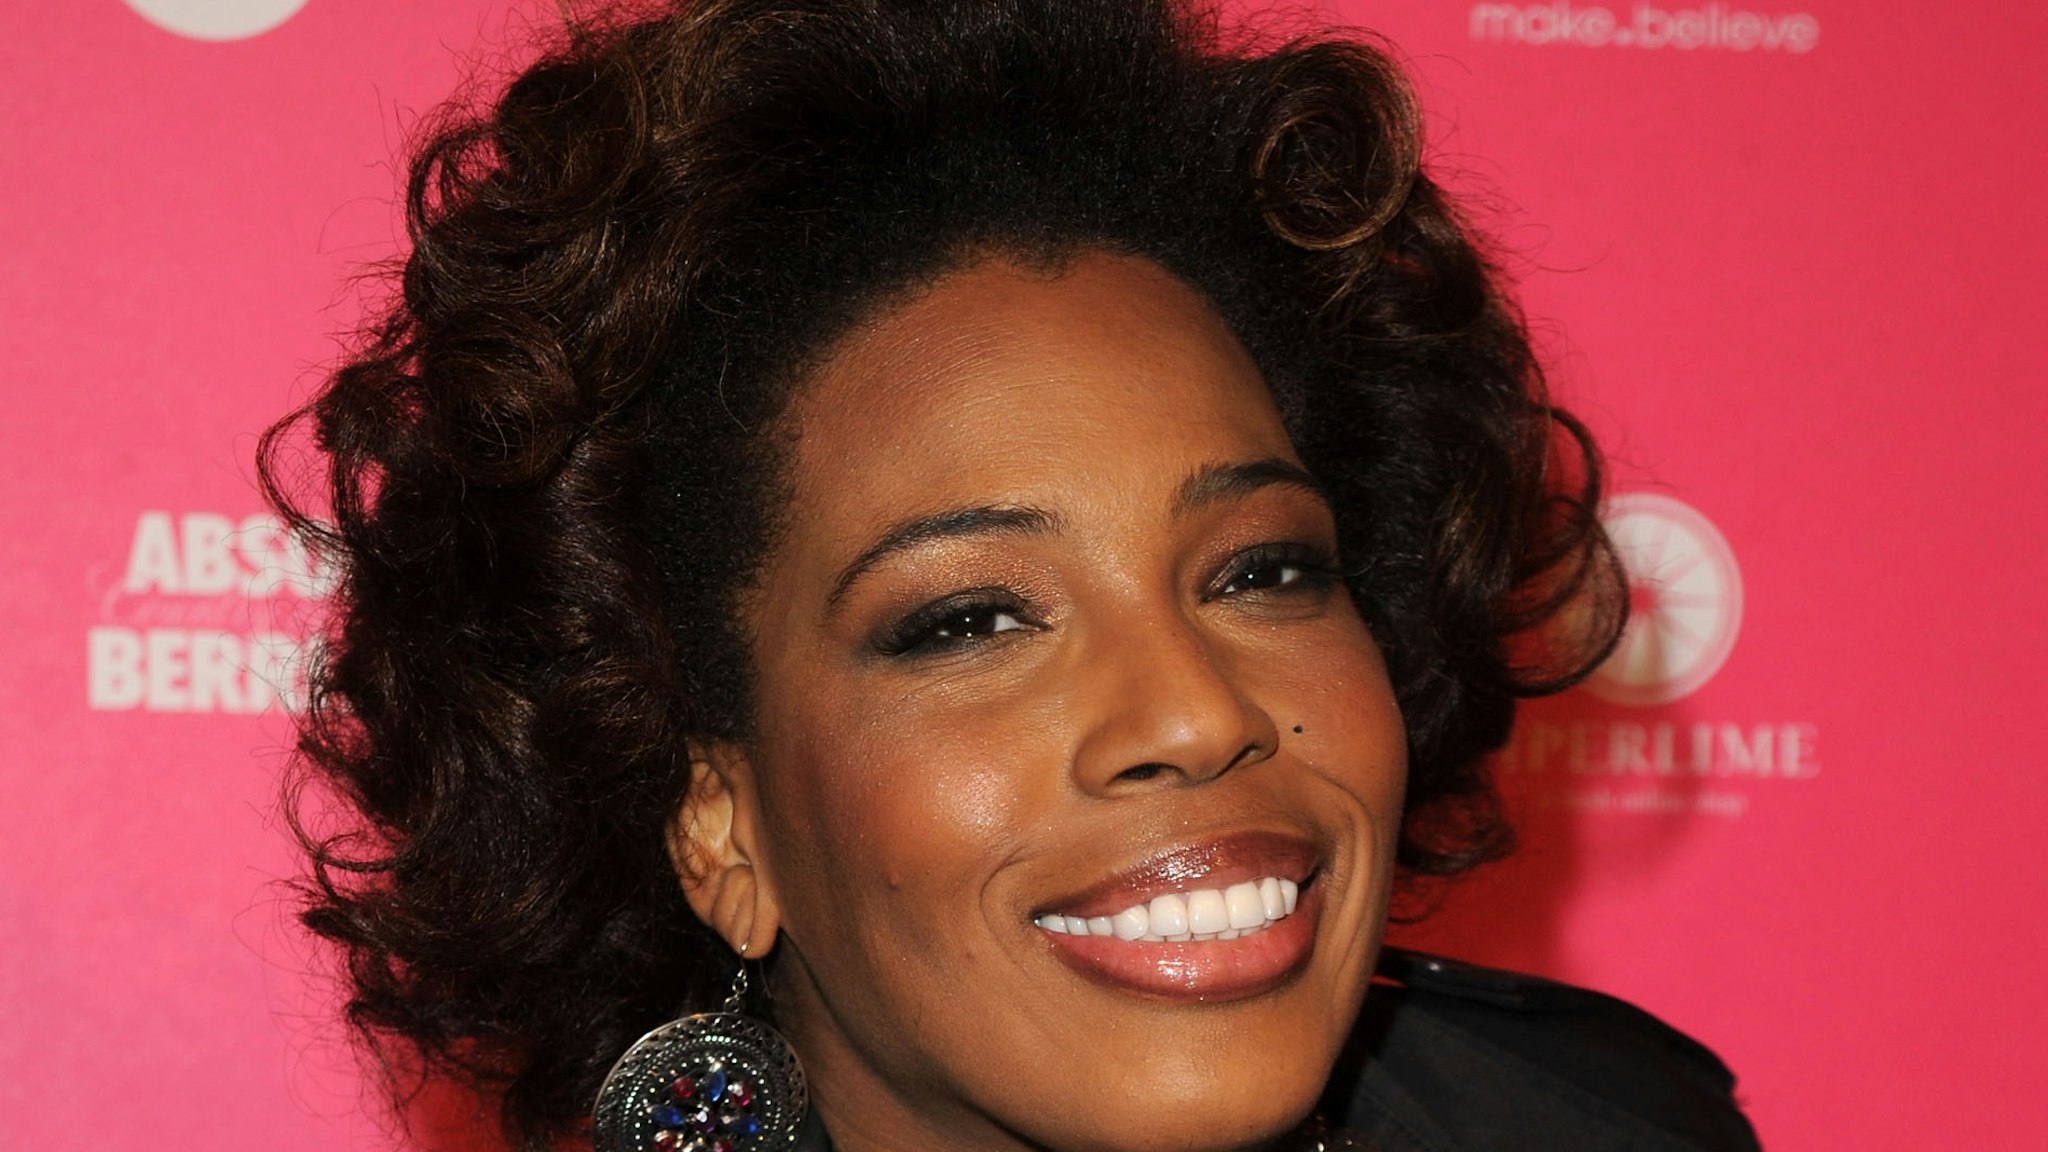 Singer Macy Gray arrives at the Us Weekly Hot Hollywood Style Issue celebration held at Drai's Hollywood at the W Hollywood Hotel on April 22, 2010 in Hollywood, California.